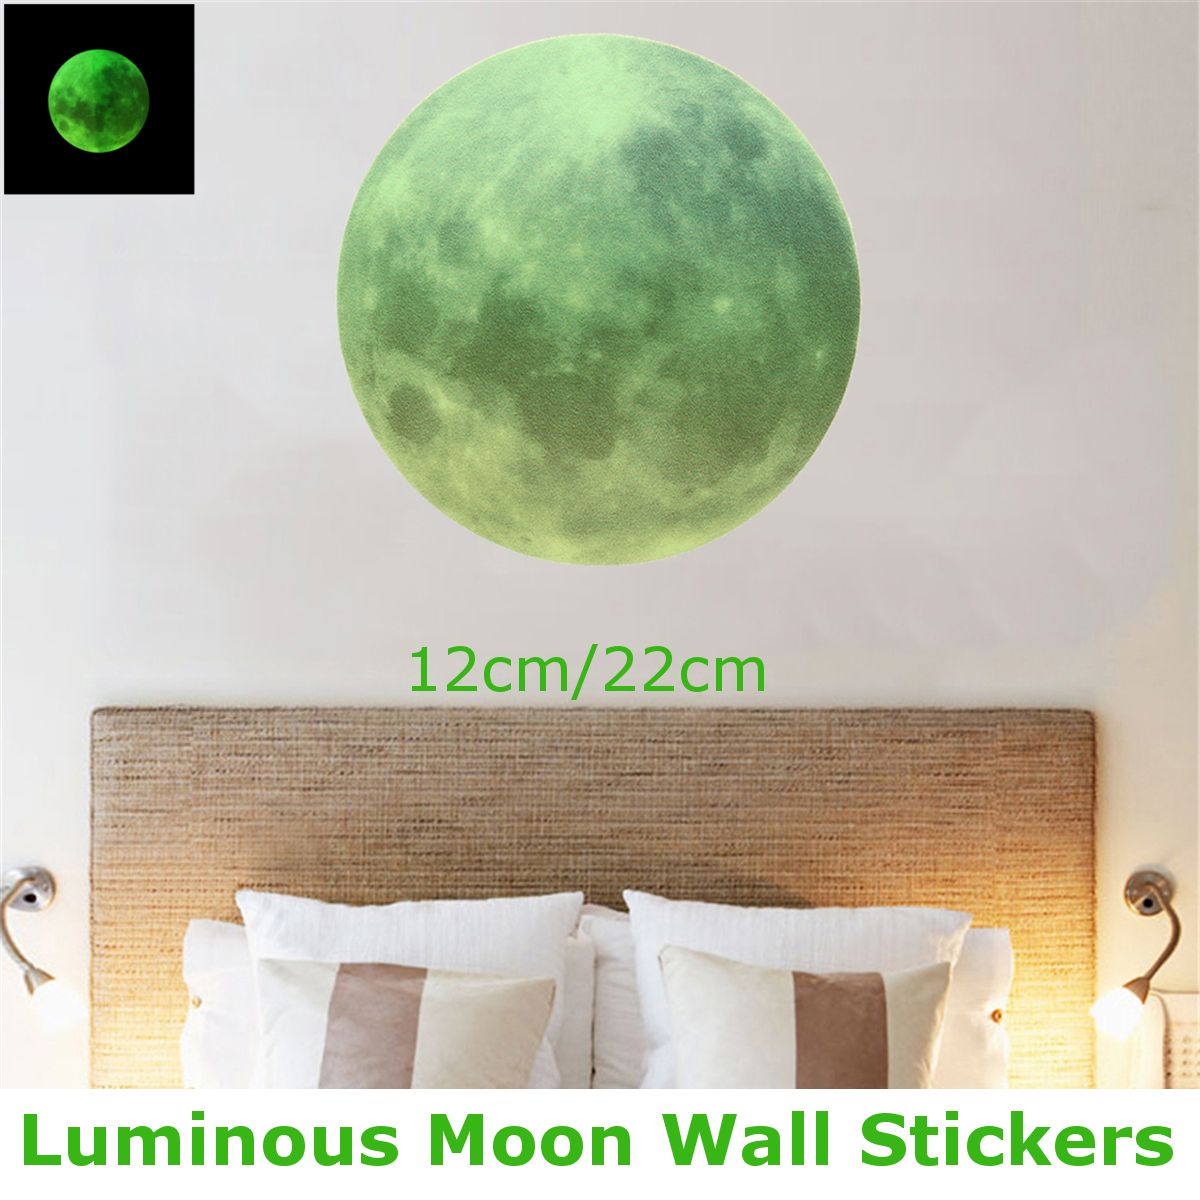 1222CM-Moon-Wall-Decal-Sticker-Moonlight-In-The-Dark-Ceiling-Home-Room-Decorations-1537346